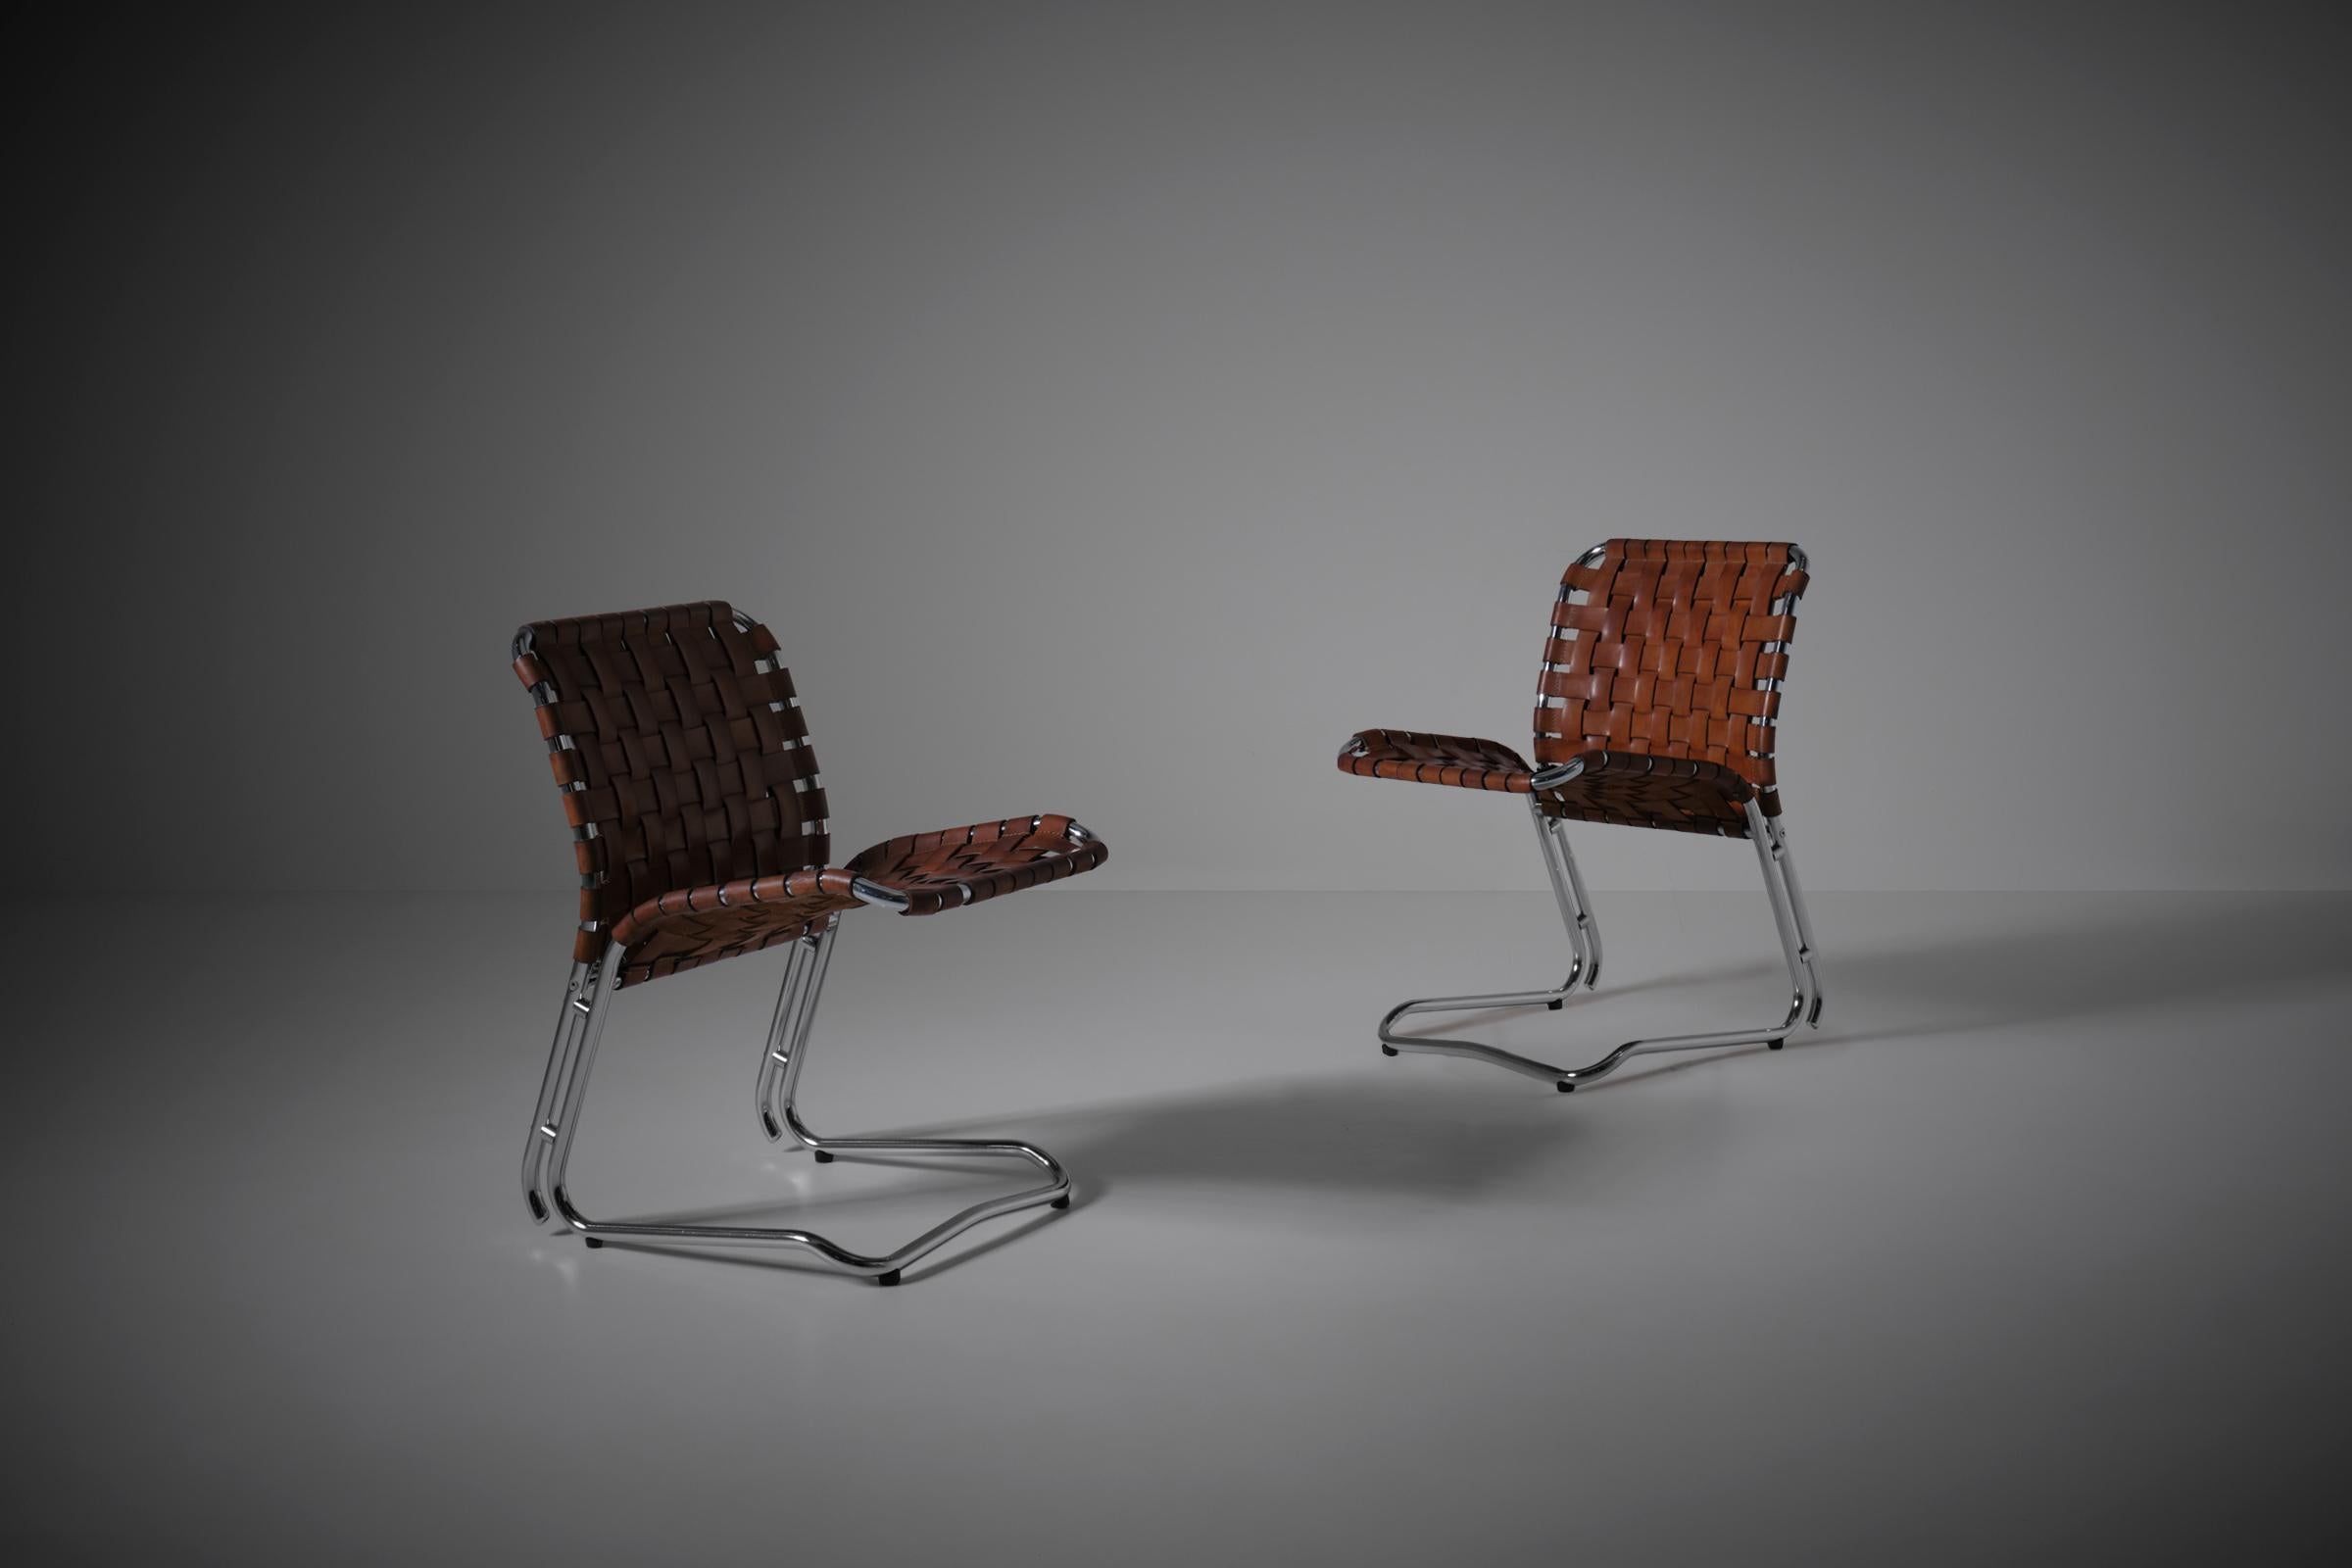 Pair of Italian side chairs, 1960s. Remarkable design and combination of materials. The high quality chromed tubular frames make a stunning contrast with the warm colored saddle leather straps; the original leather remains in a very good strong and